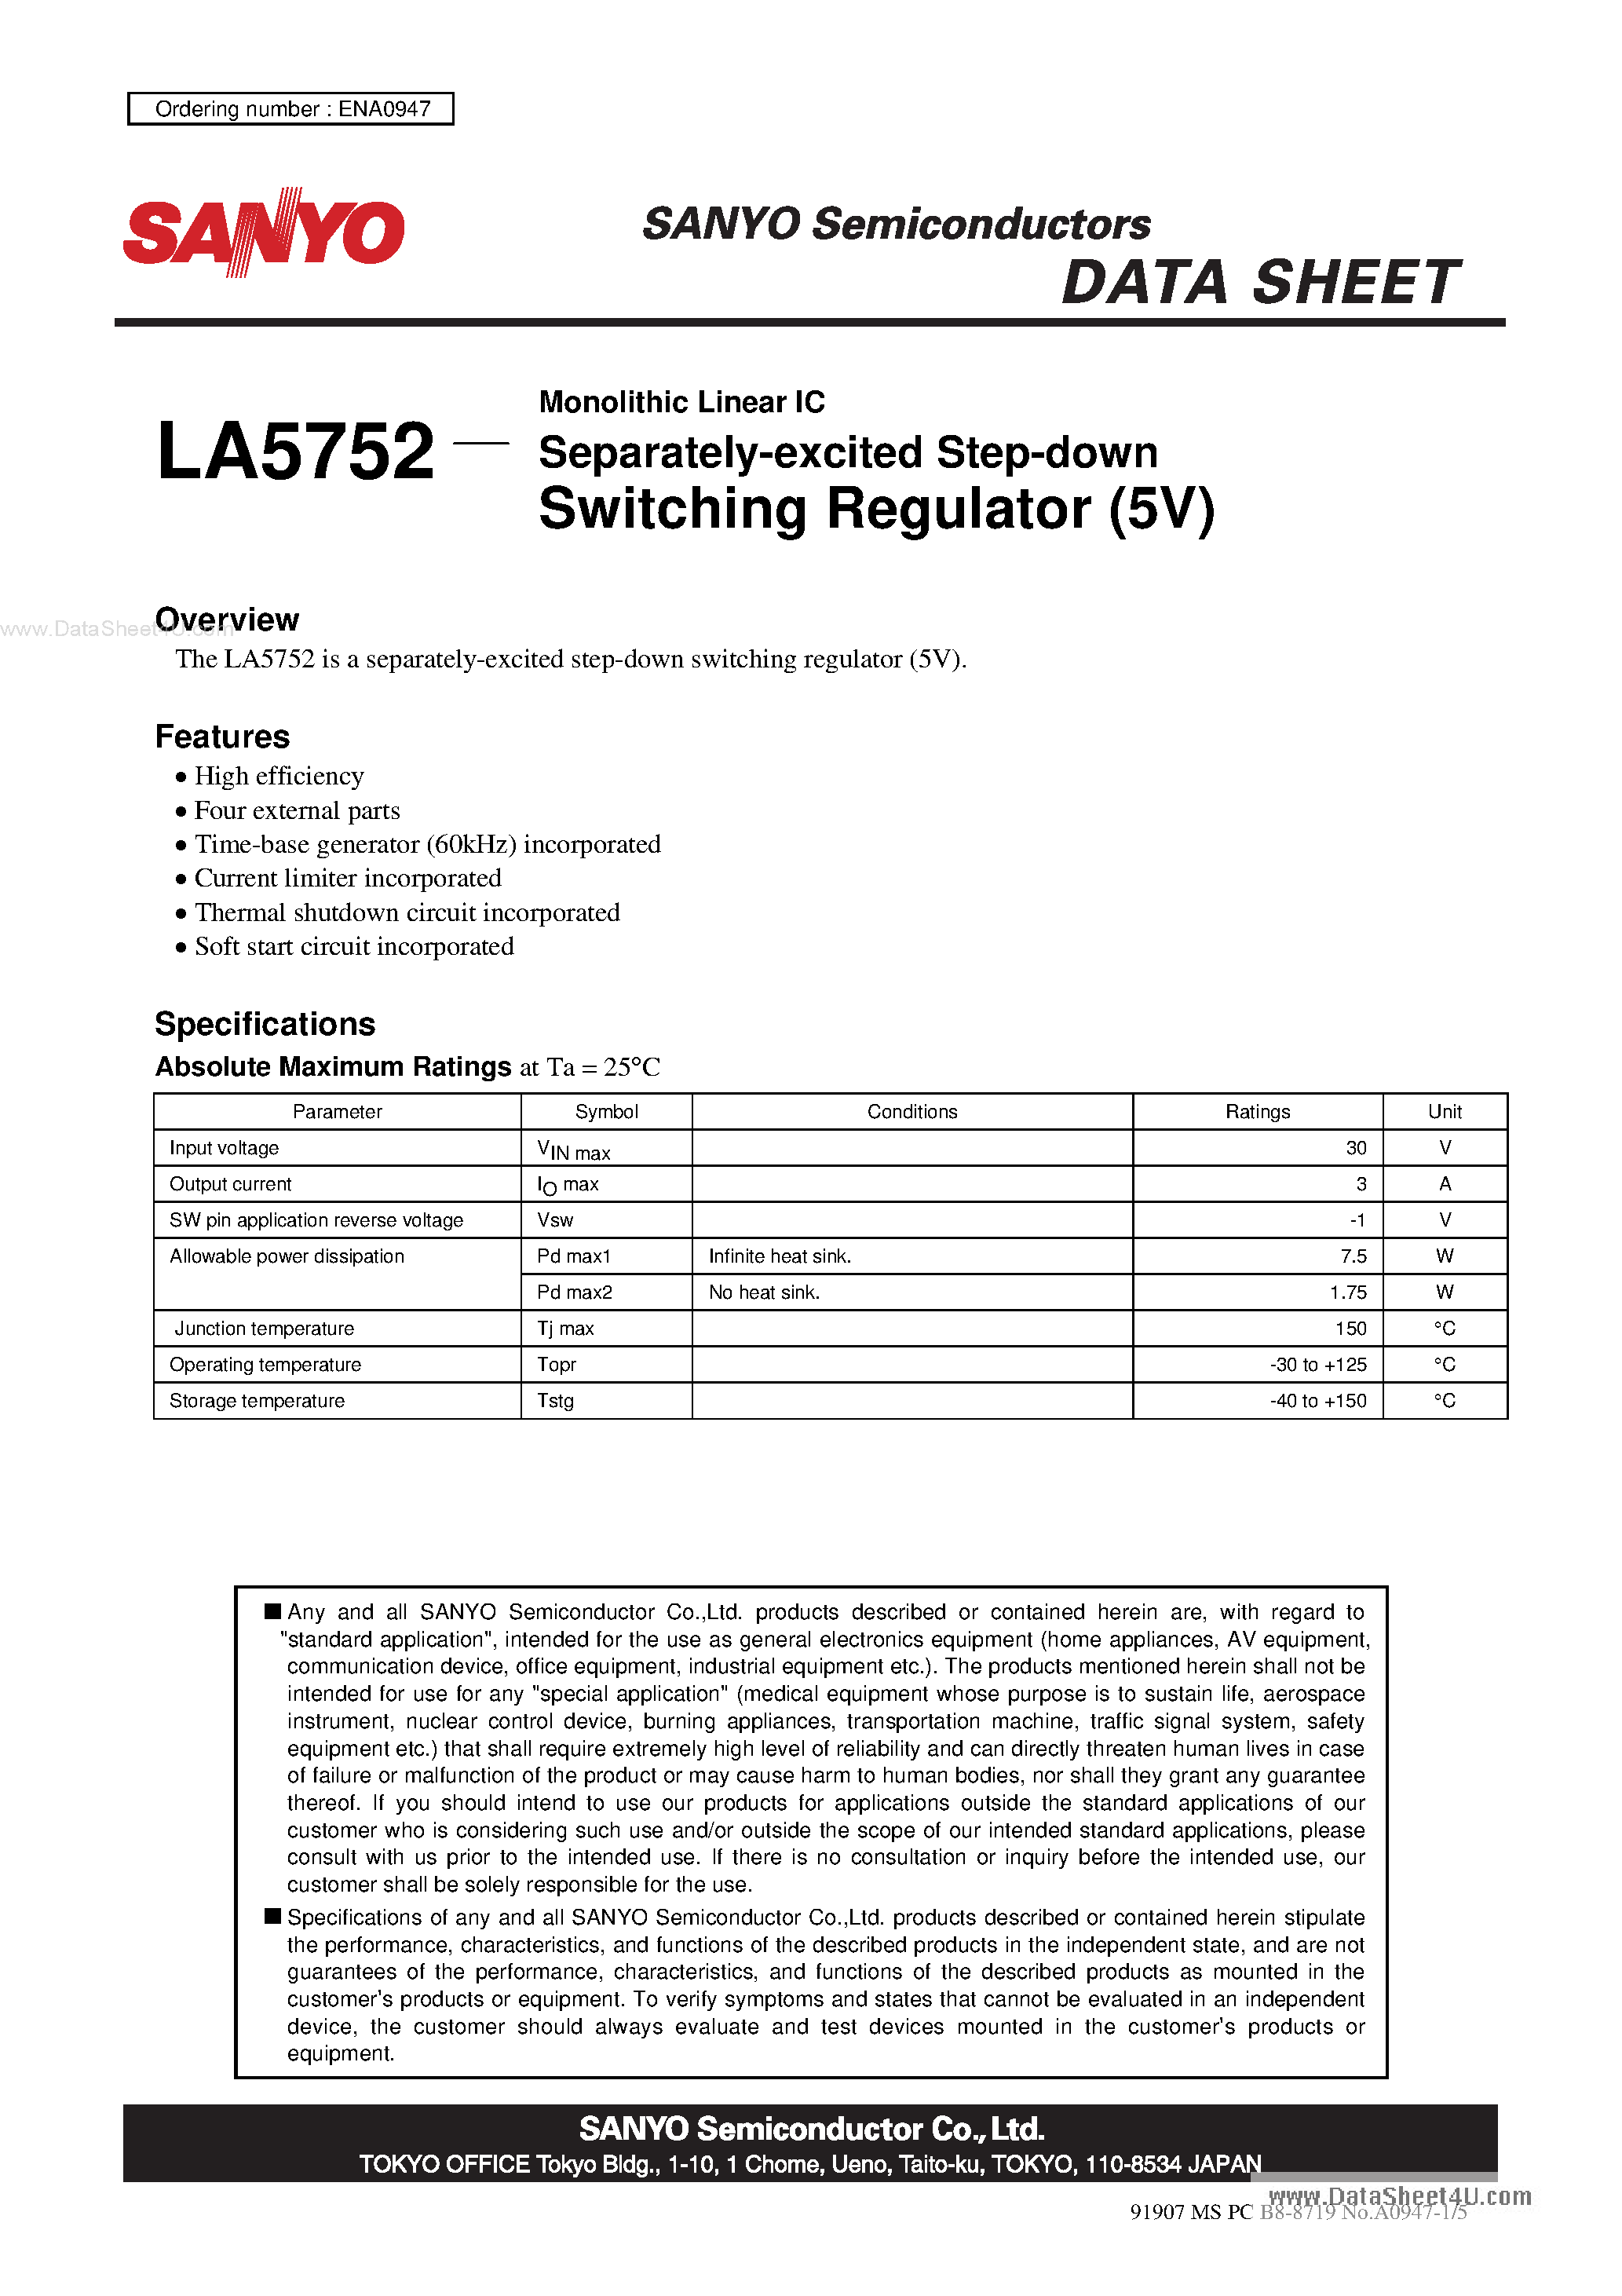 Даташит LA5752-Monolithic Linear IC Separately-Excited Step-Down Switching Regulator страница 1